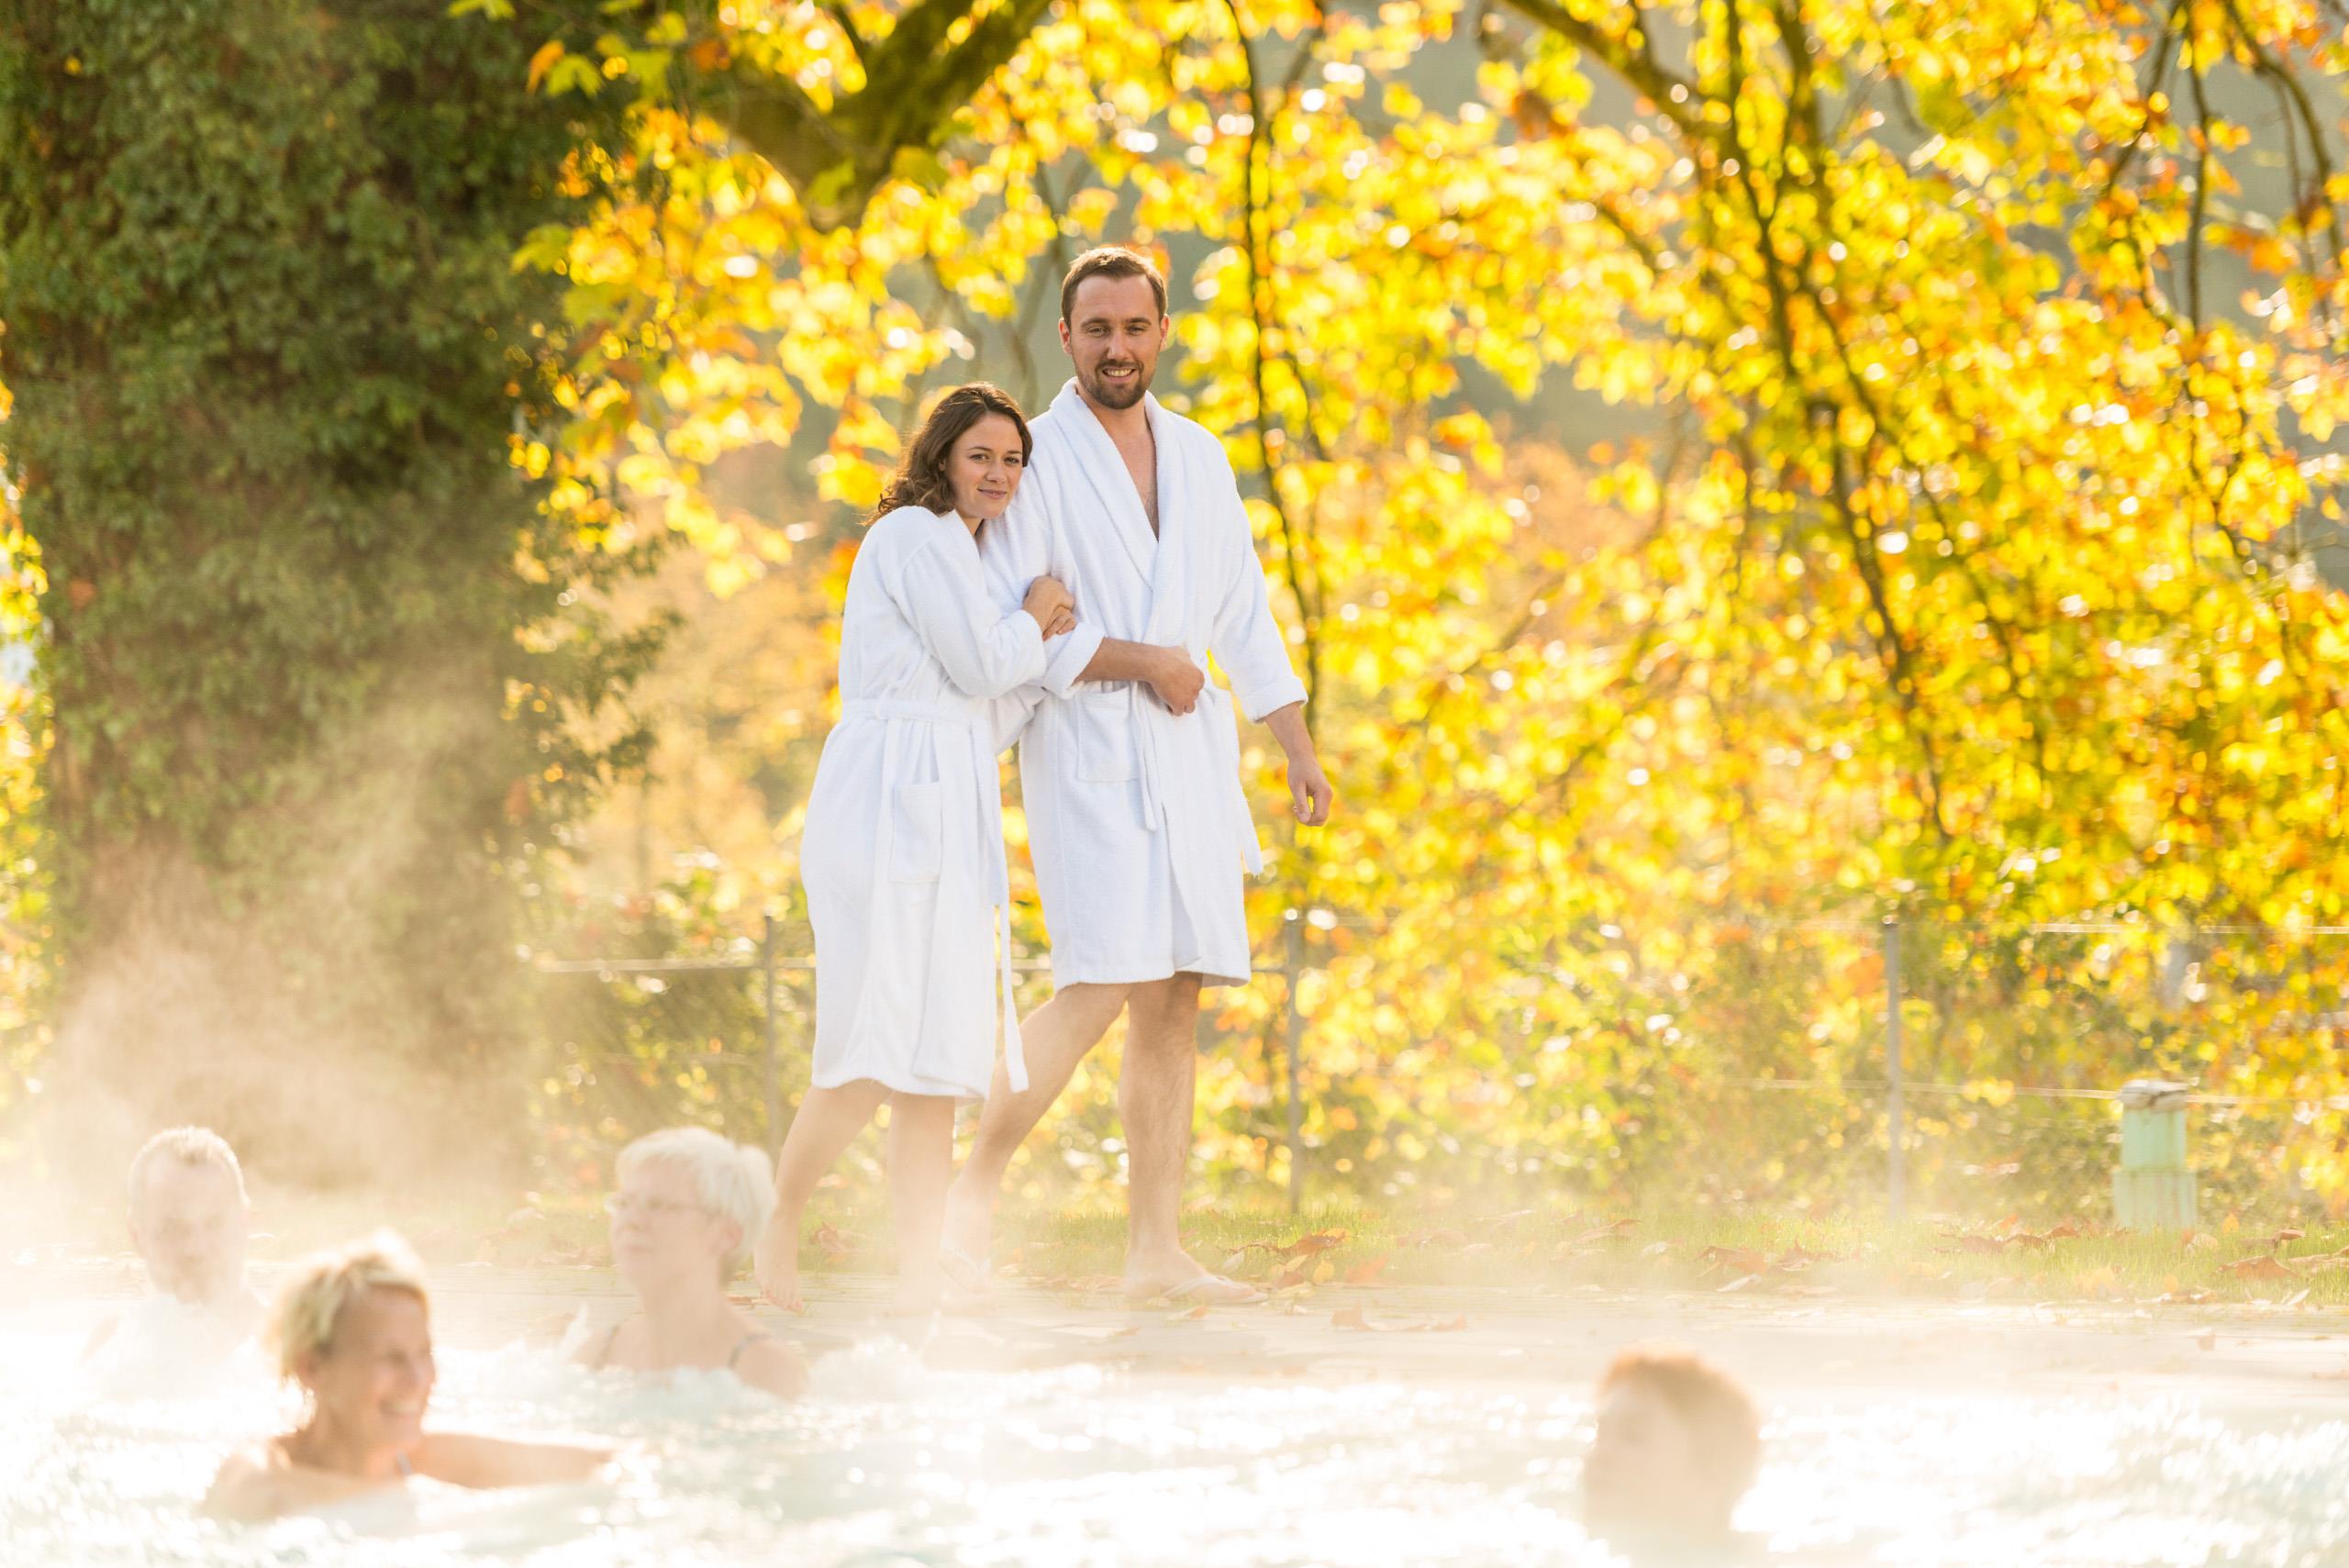 Emser Therme im Herbst